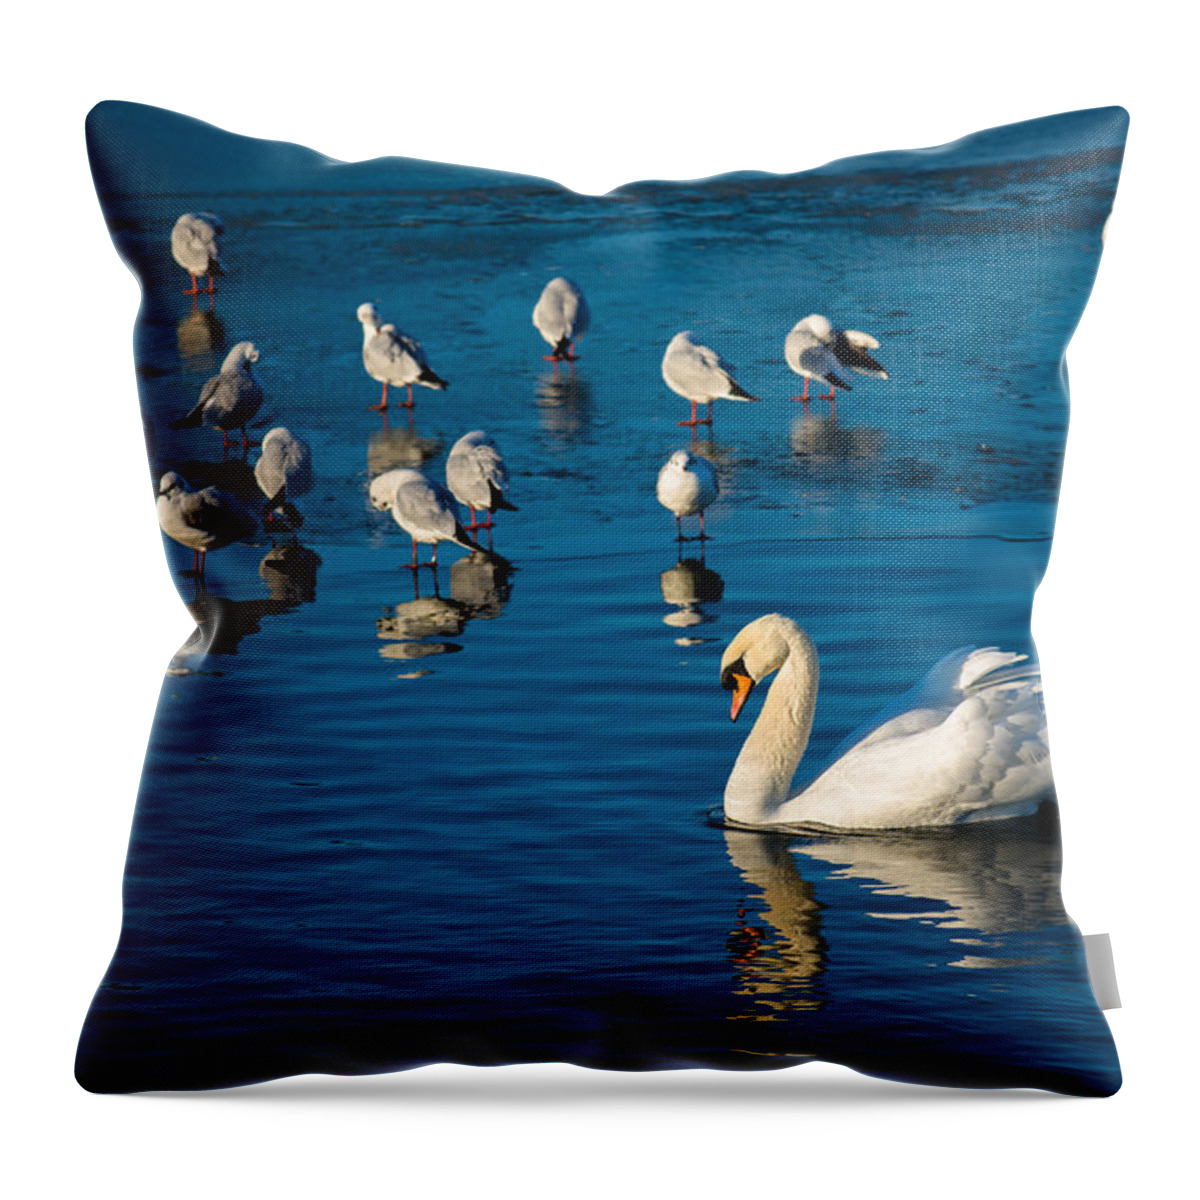 Seagulls Throw Pillow featuring the photograph Swan And Seagulls On Frozen Lake by Andreas Berthold